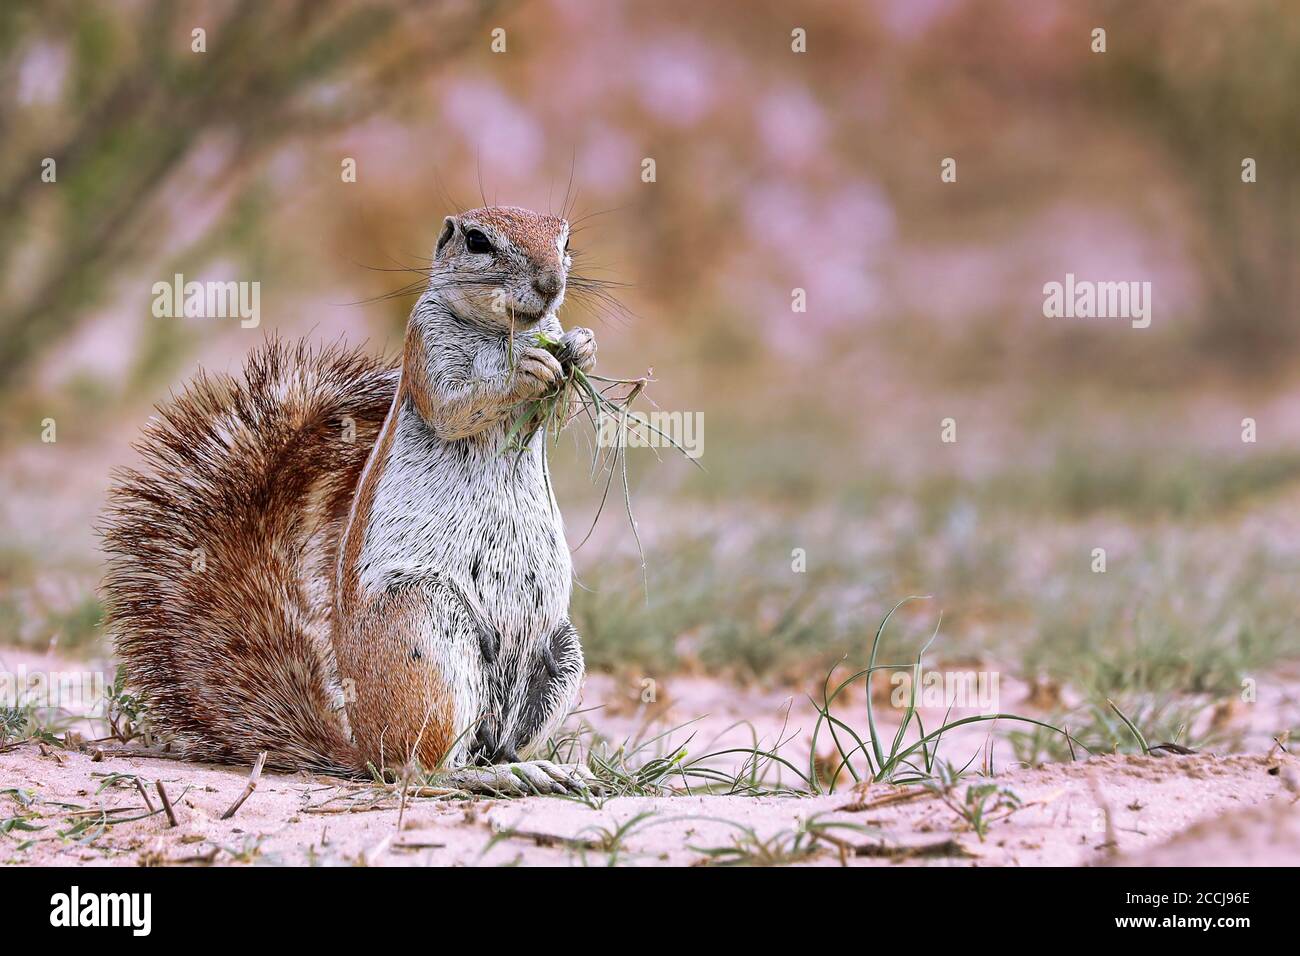 Ground squirrel, Kgalagadi Transfrontier National Park, South Africa, Stock Photo